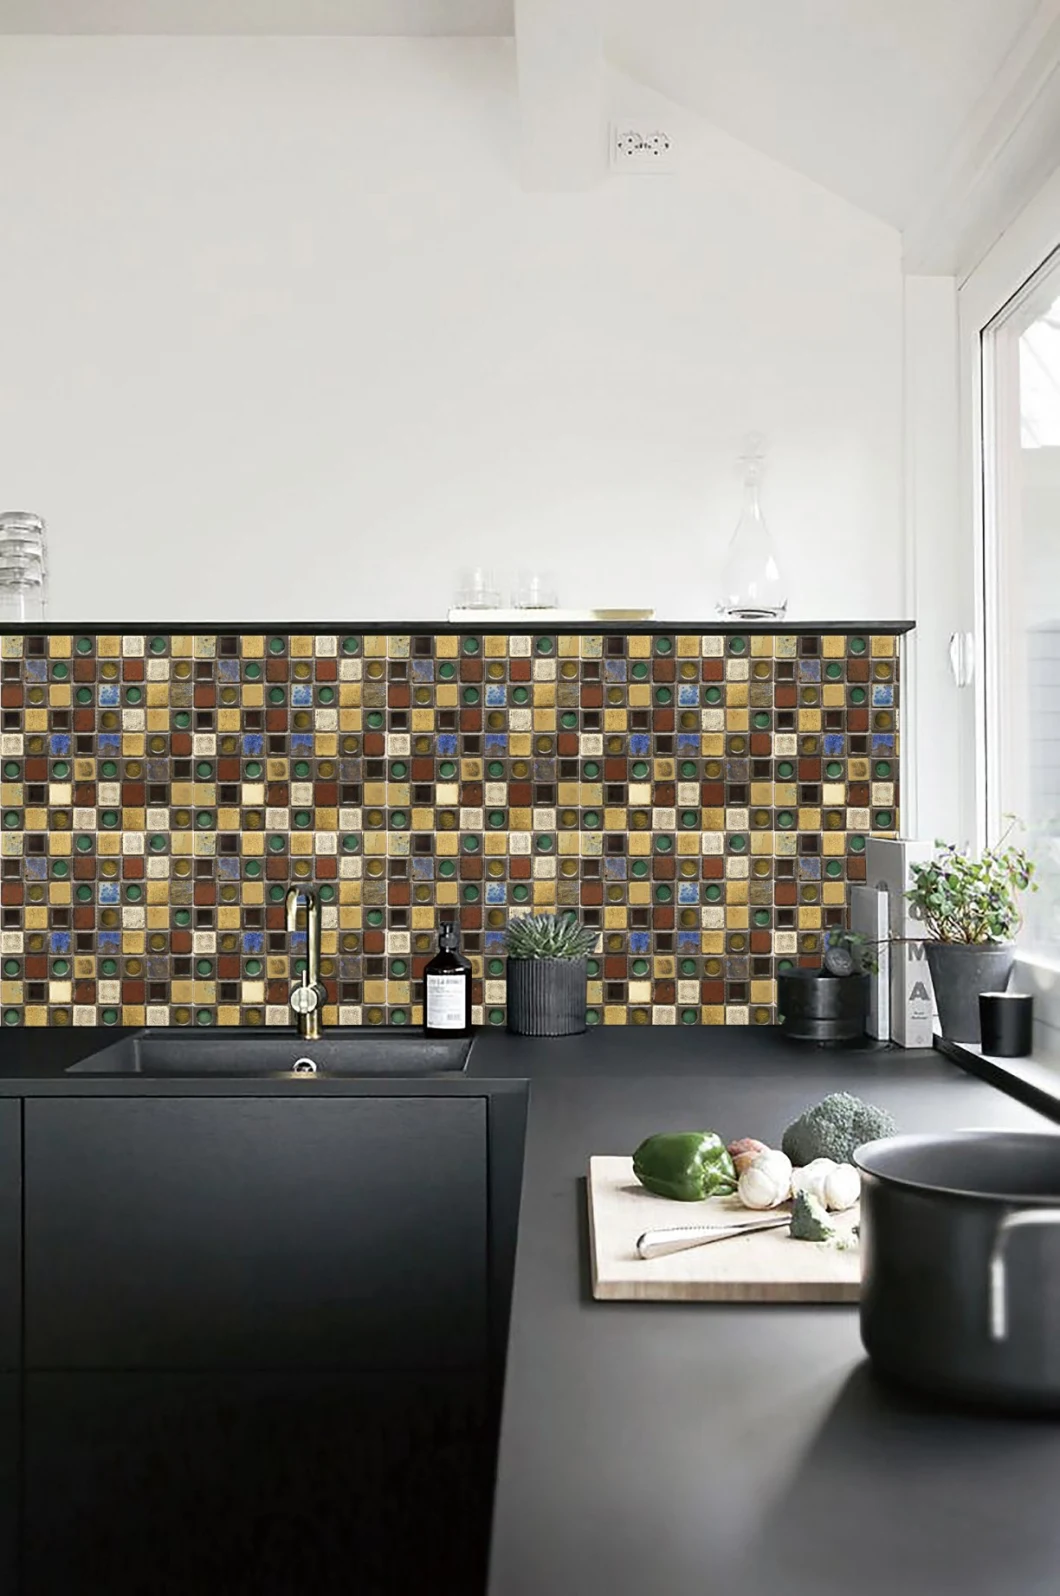 High Quality Wholesale Popular Handmade Ceramic Colored Mosaic Wall Tiles